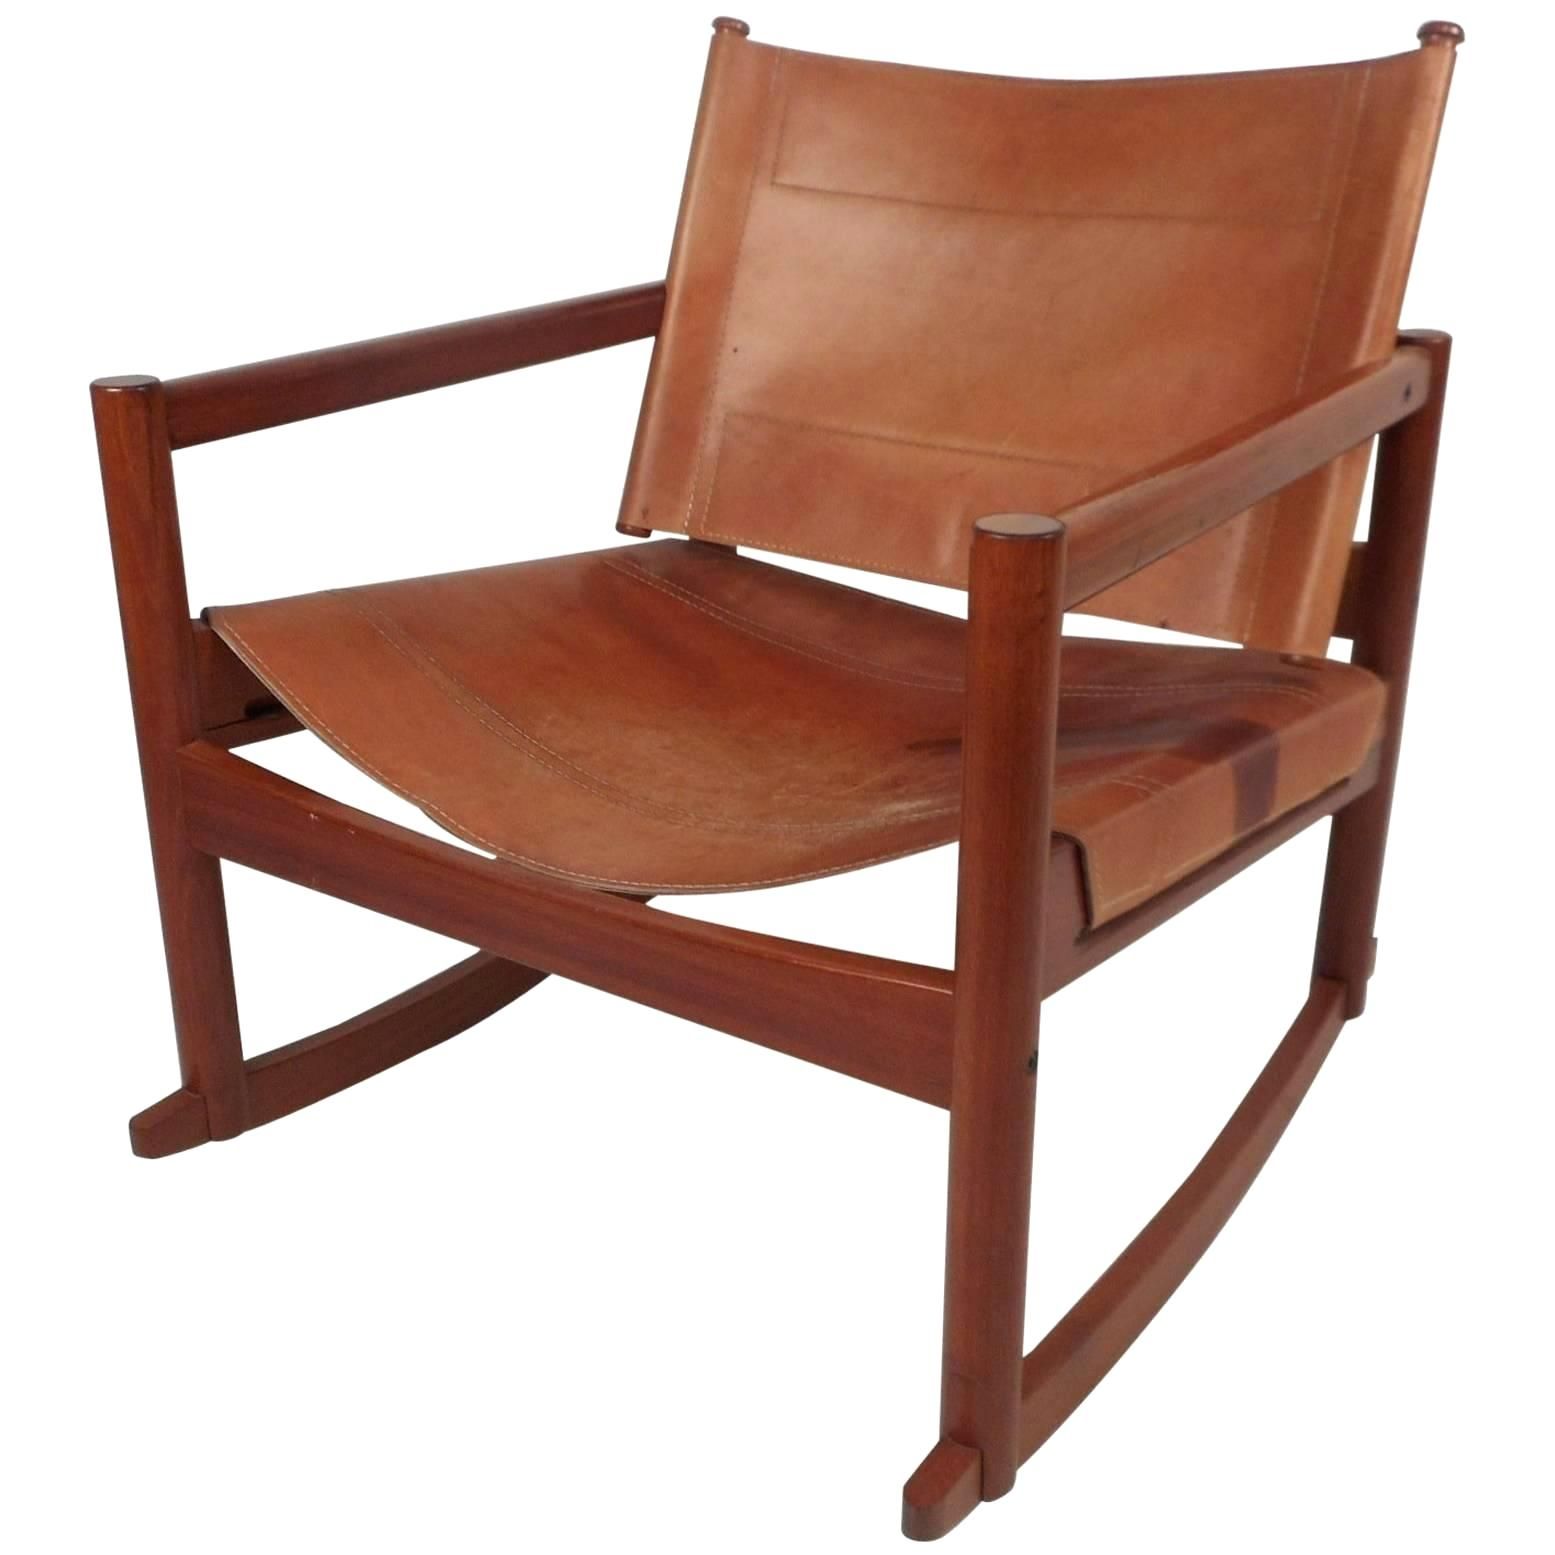 Rocking Leather Chair – Muangfan Regarding Faux Leather Upholstered Wooden Rocking Chairs With Looped Arms, Brown And Red (View 6 of 20)